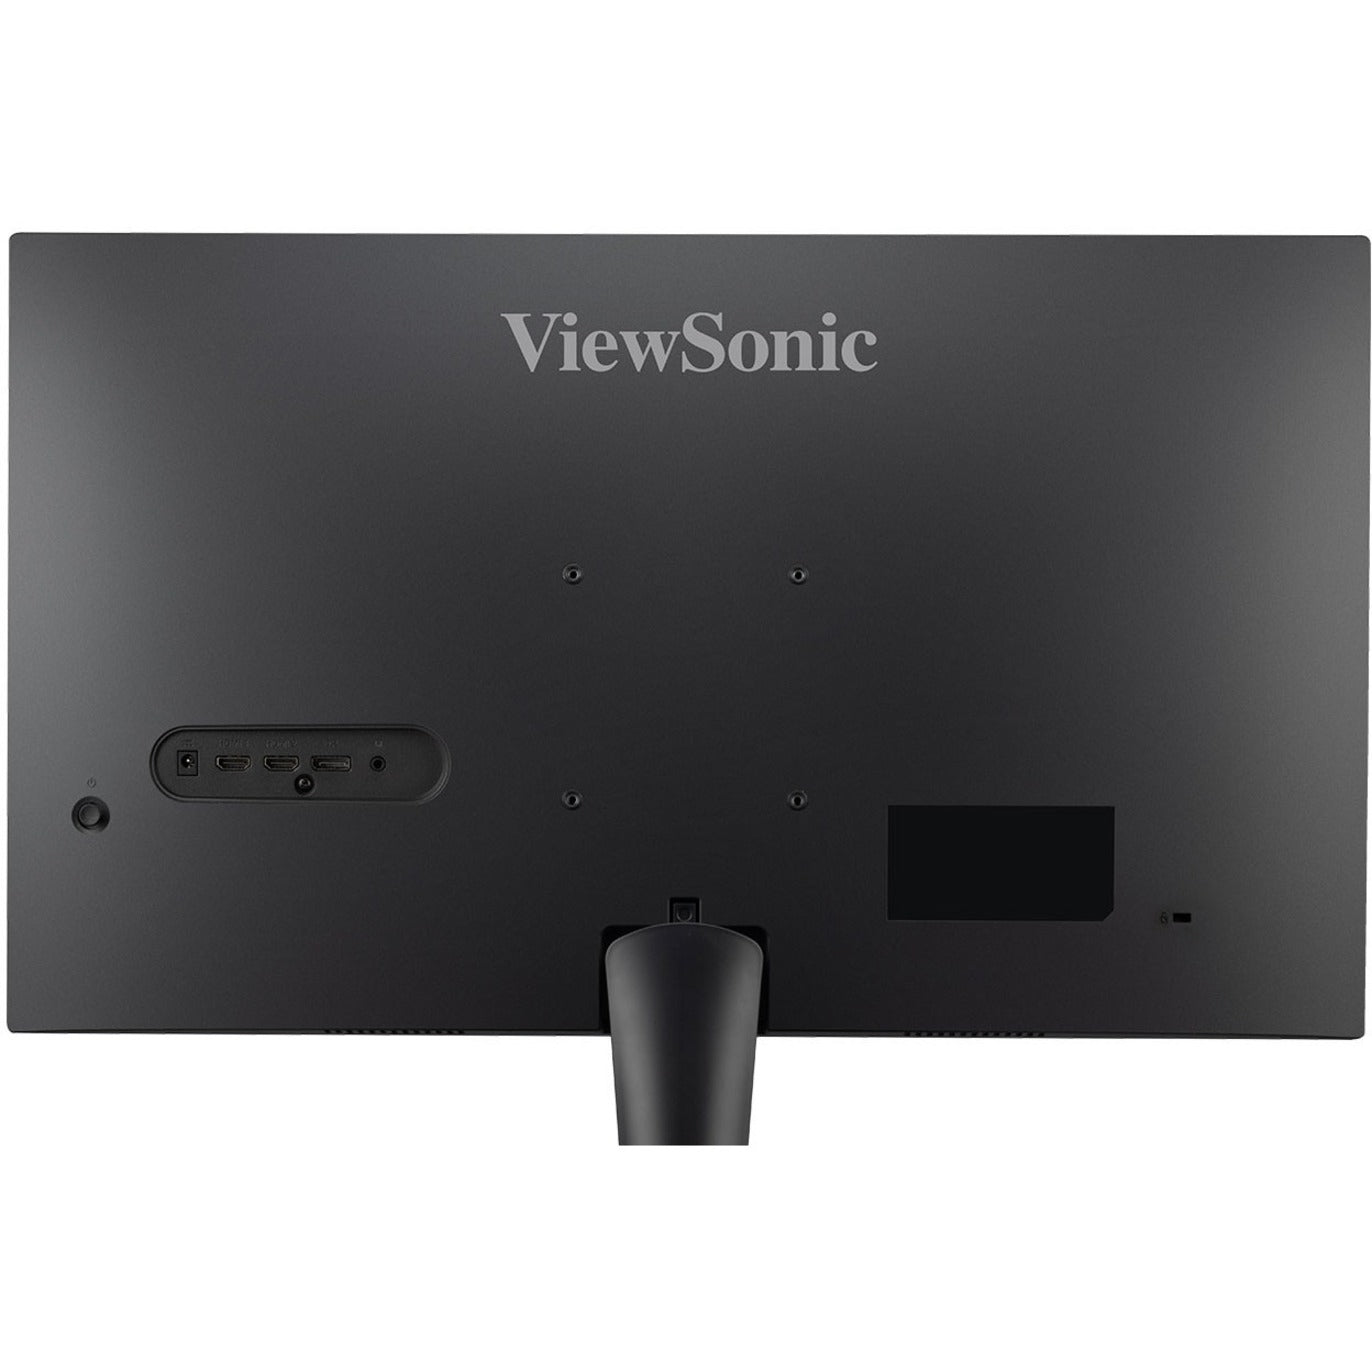 ViewSonic VA2715-2K-MHD 27 Inch 1440p LED Monitor with Adaptive Sync Ultra-Thin Bezels HDMI and DisplayPort Inputs for Home and Office